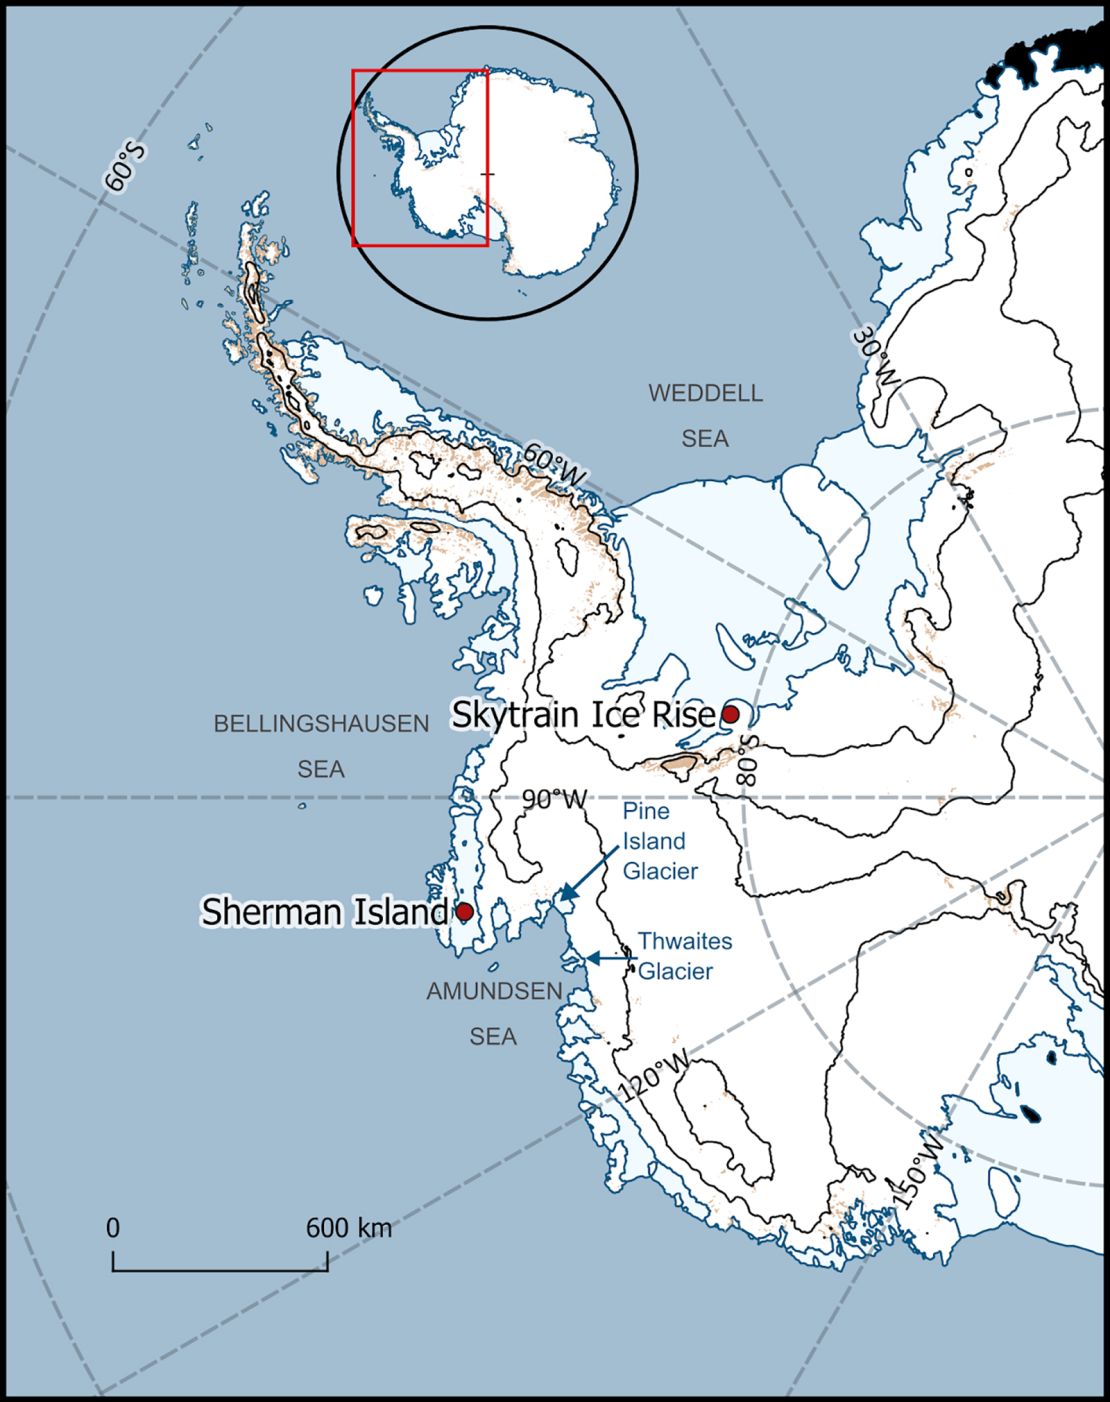 Map showing the location of the Skytrain Ice Rise, part of the Ronne Ice Shelf, from where the ice core was taken.